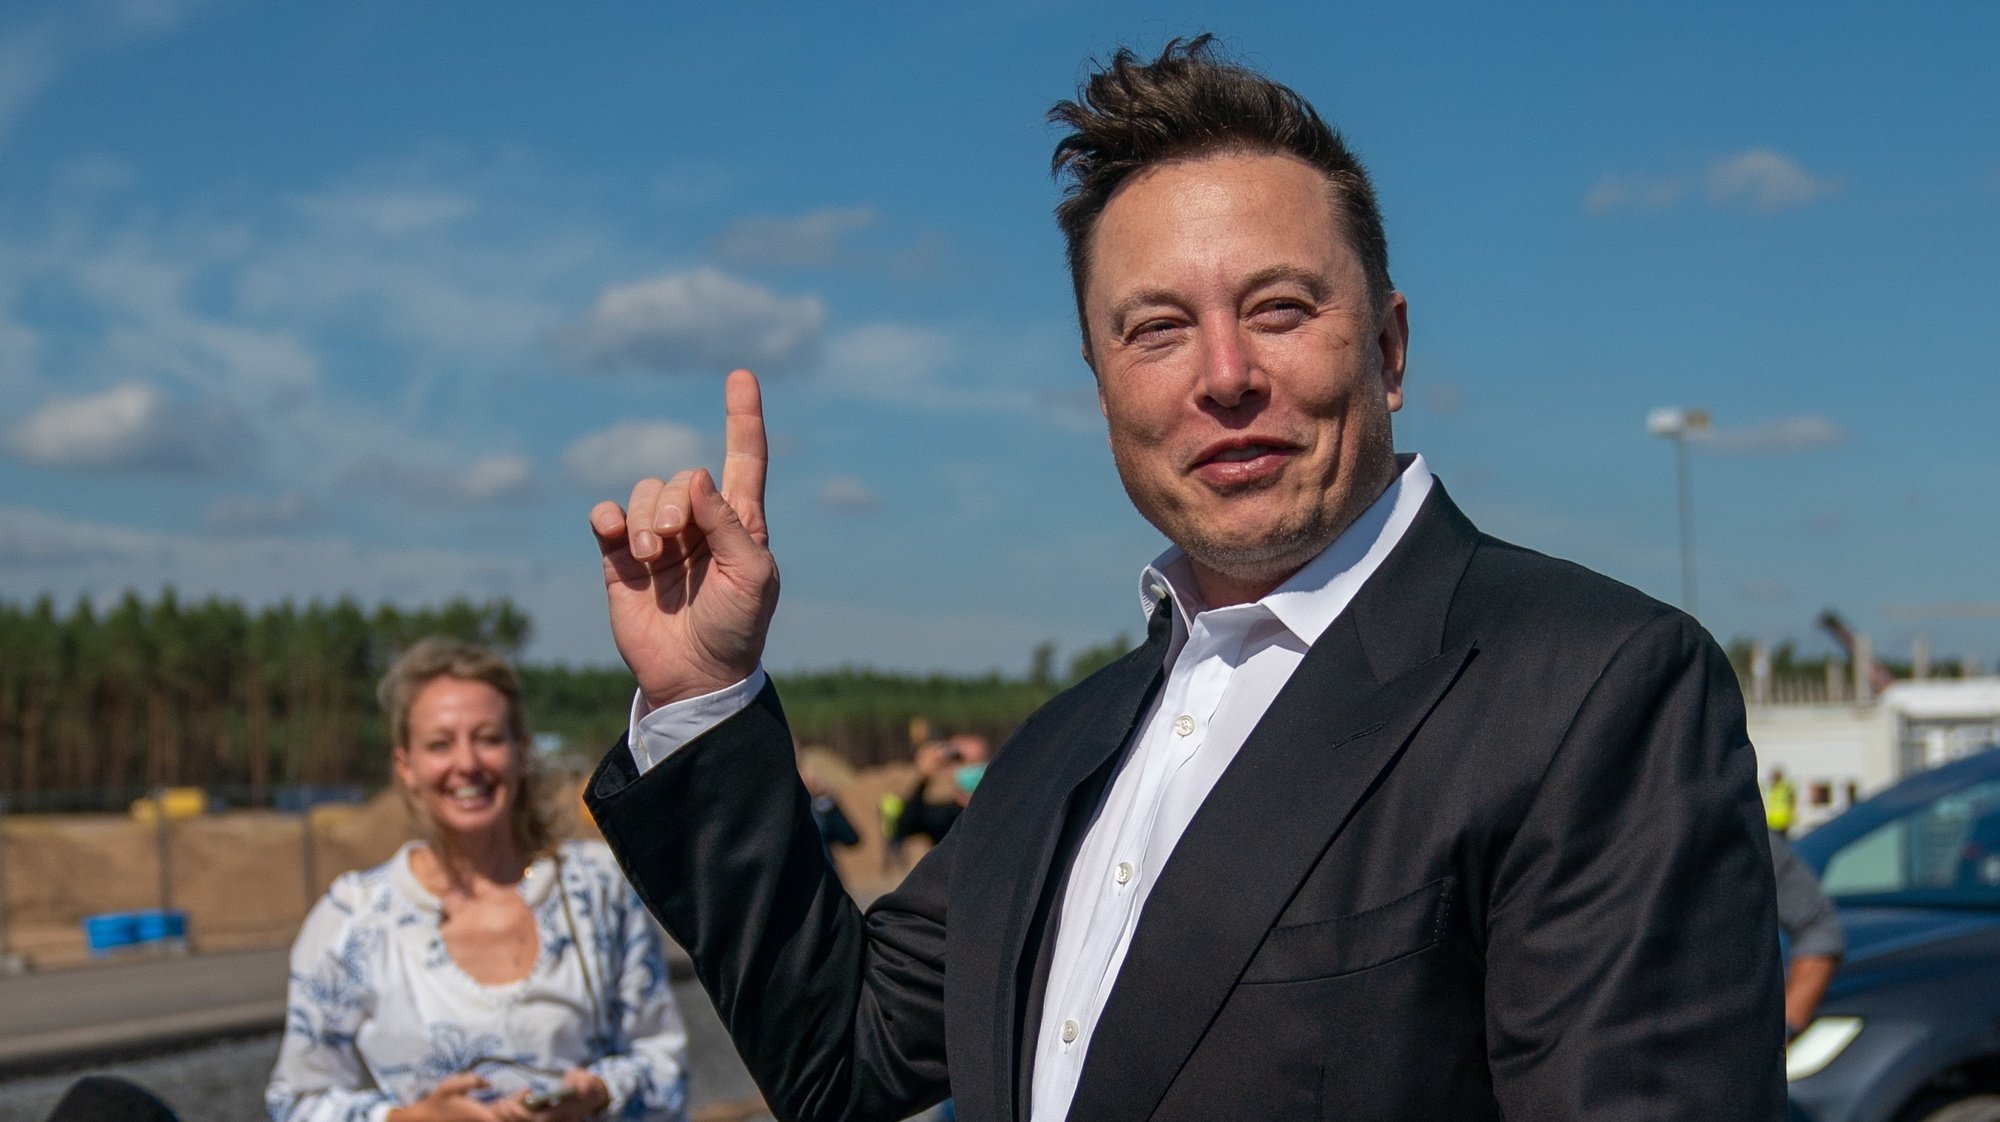 epa08925442 (FILE) - Tesla and SpaceX CEO Elon Musk (R) gives a statement at the construction site of the Tesla Giga Factory in Gruenheide near Berlin, Germany, 03 September 2020 (Reissued 07 January 2021). According to reports on 07 January 2021, Tesla and SpaceX CEO Elon Musk became the world richest person with a net worth of more than 185 billion US dollars, surpassing Jeff Bezos, CEO of Amazon, who is currently worth 184 billion US dollars.  EPA/ALEXANDER BECHER *** Local Caption *** 56315718